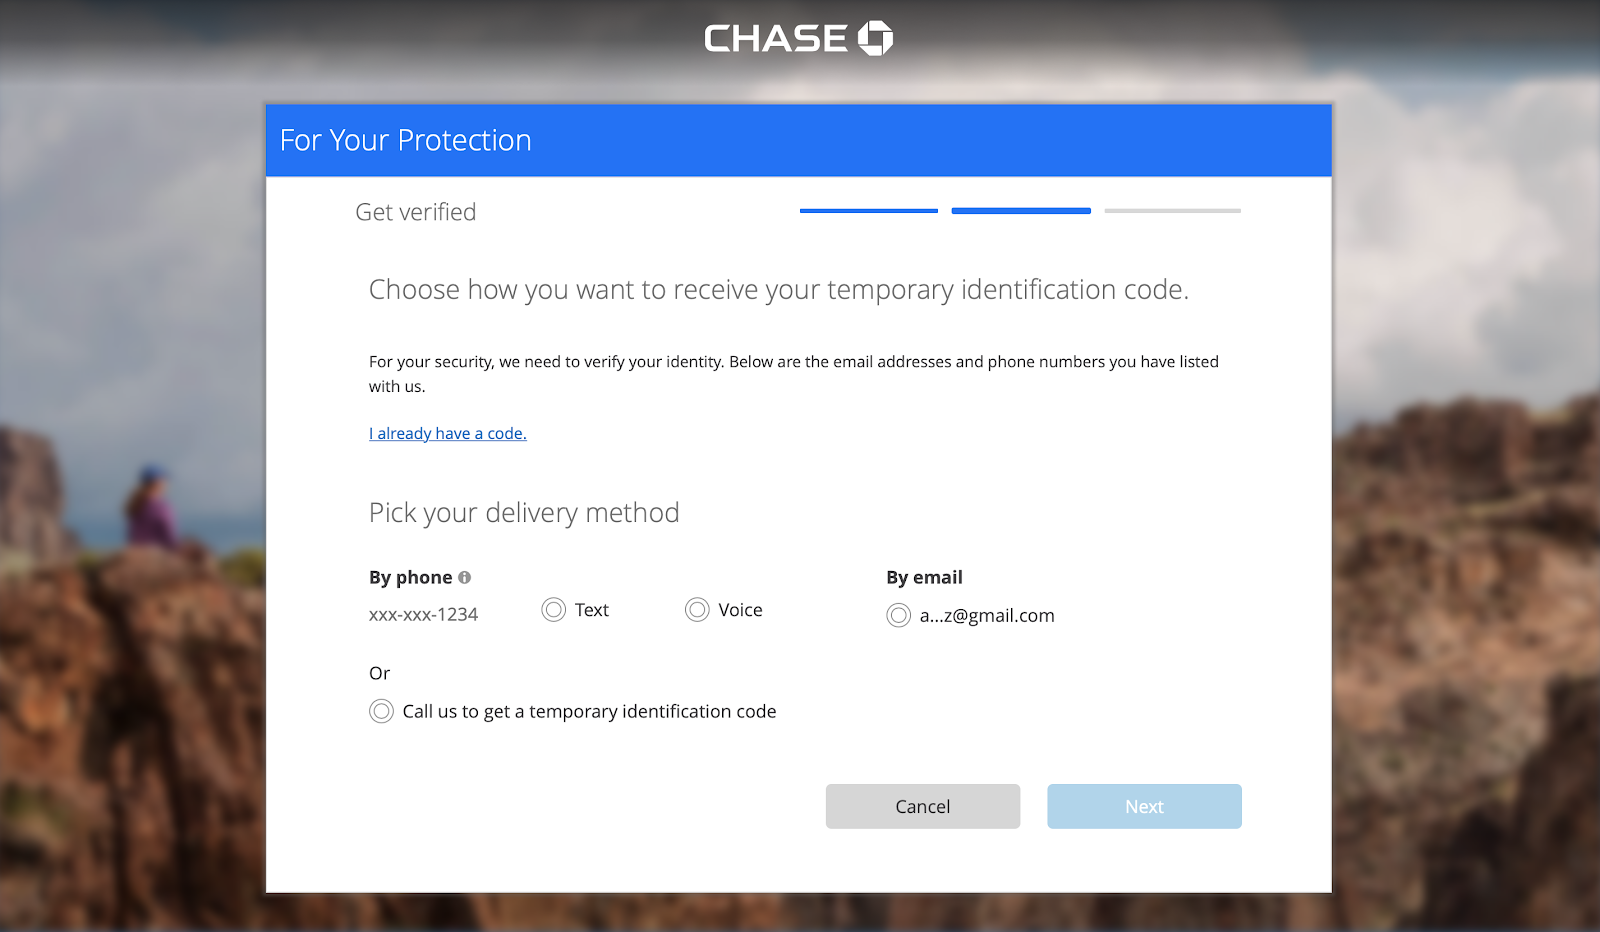 Chase bank offers SMS and email based 2FA